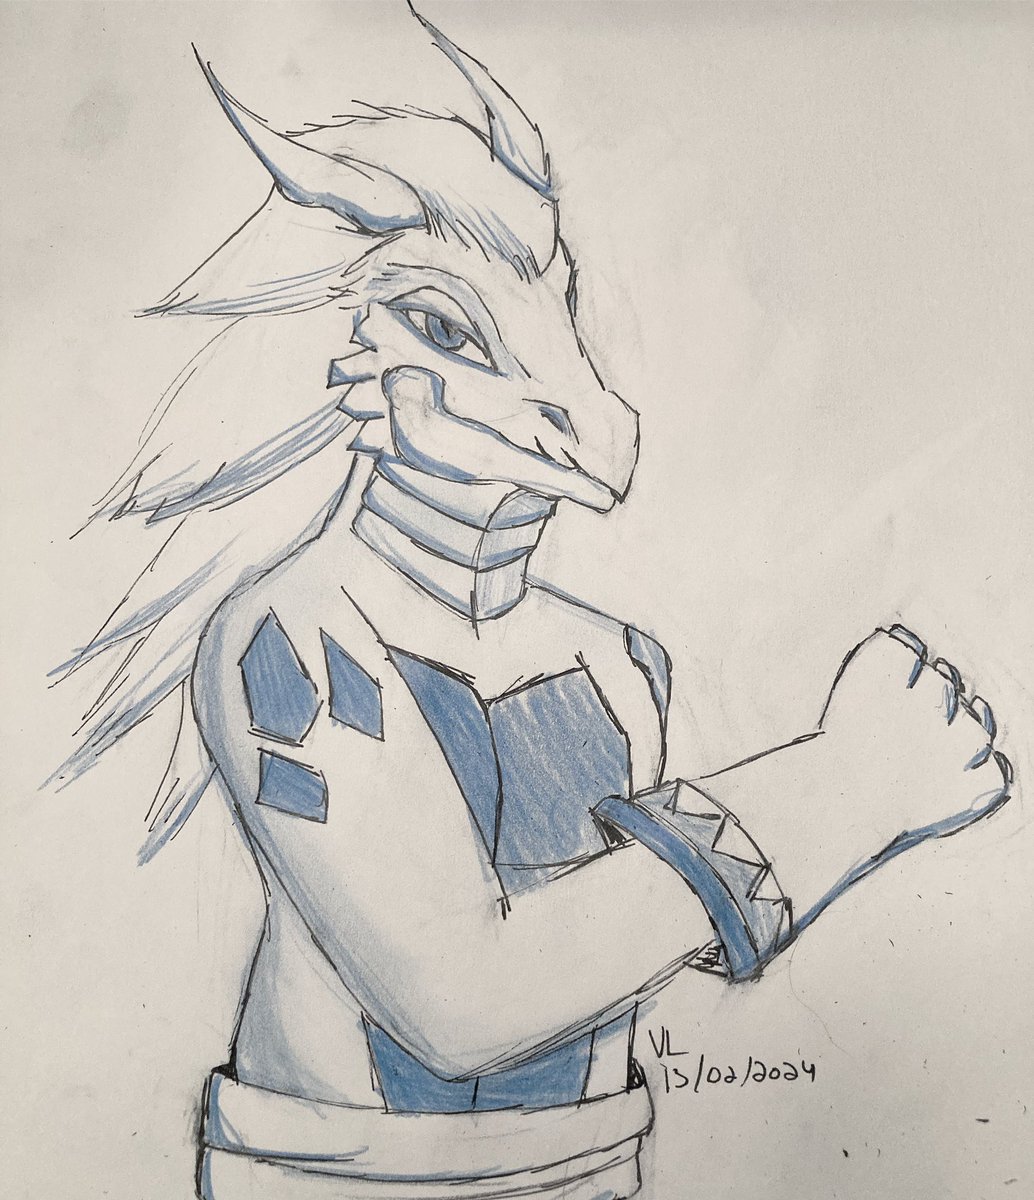 Sorry for the late, Happy Lunar New Year .
It’s long time ago I didn’t draw. This is one my DnD character, Torrin. Before, he was a samurai Dragonborn, now he chooses monk way.
#dnd #dndart #DnDcharacter #HappyLunarNewYear #YearOfTheDragon2024 #YearOfTheDragon #dragonborn